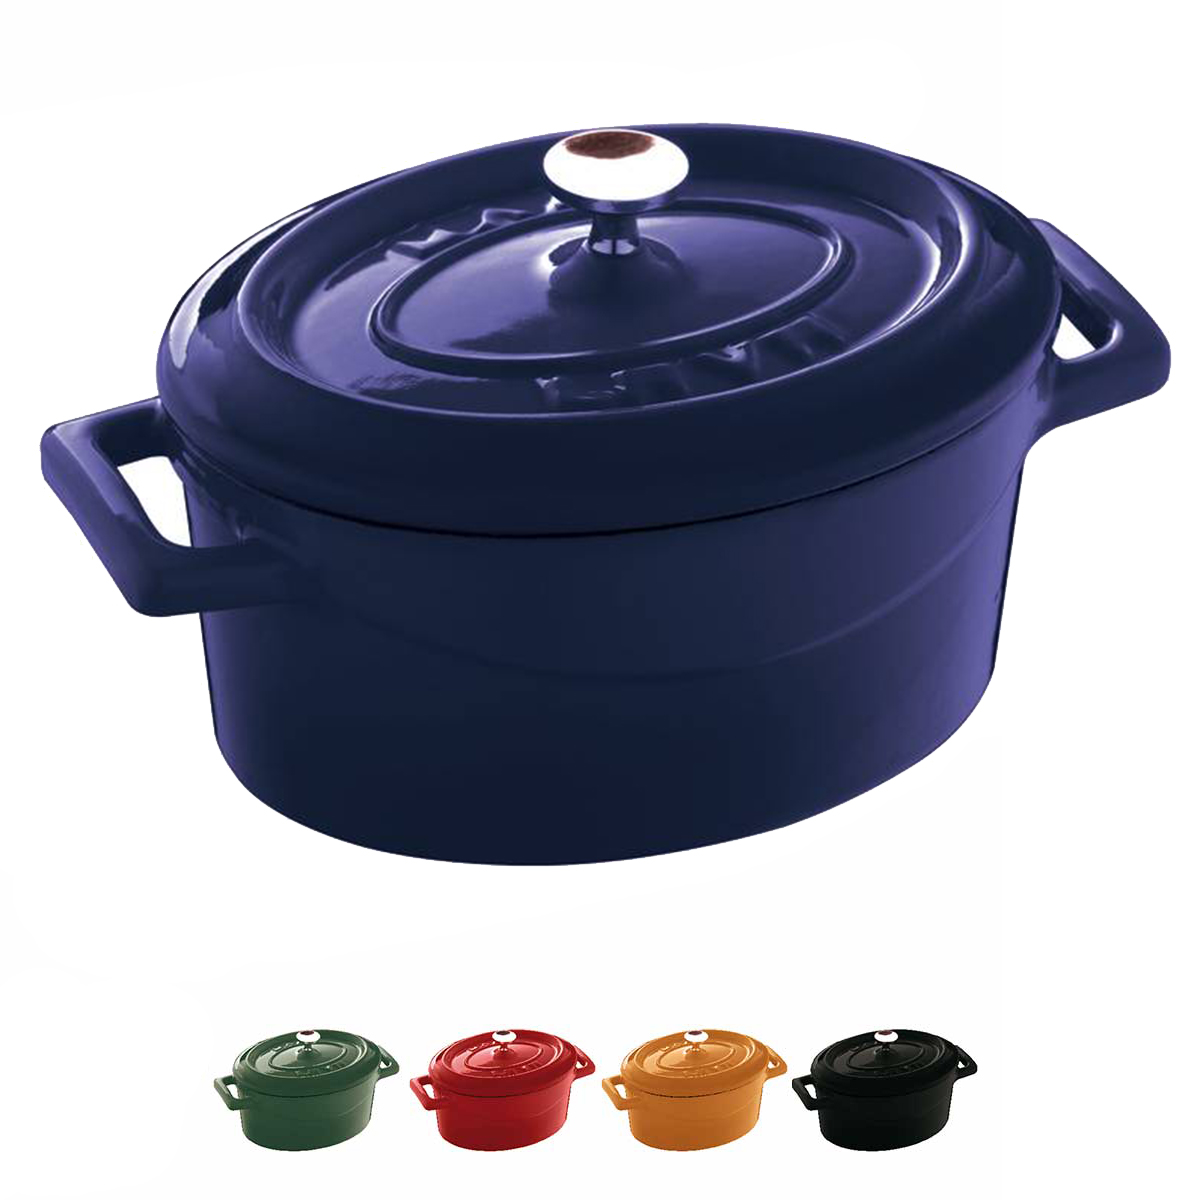 Lava Pentola Casseruola Ghisa Ovale 33 cm – Lava Cooking System – Pentole  in Ghisa – Padelle in Ghisa